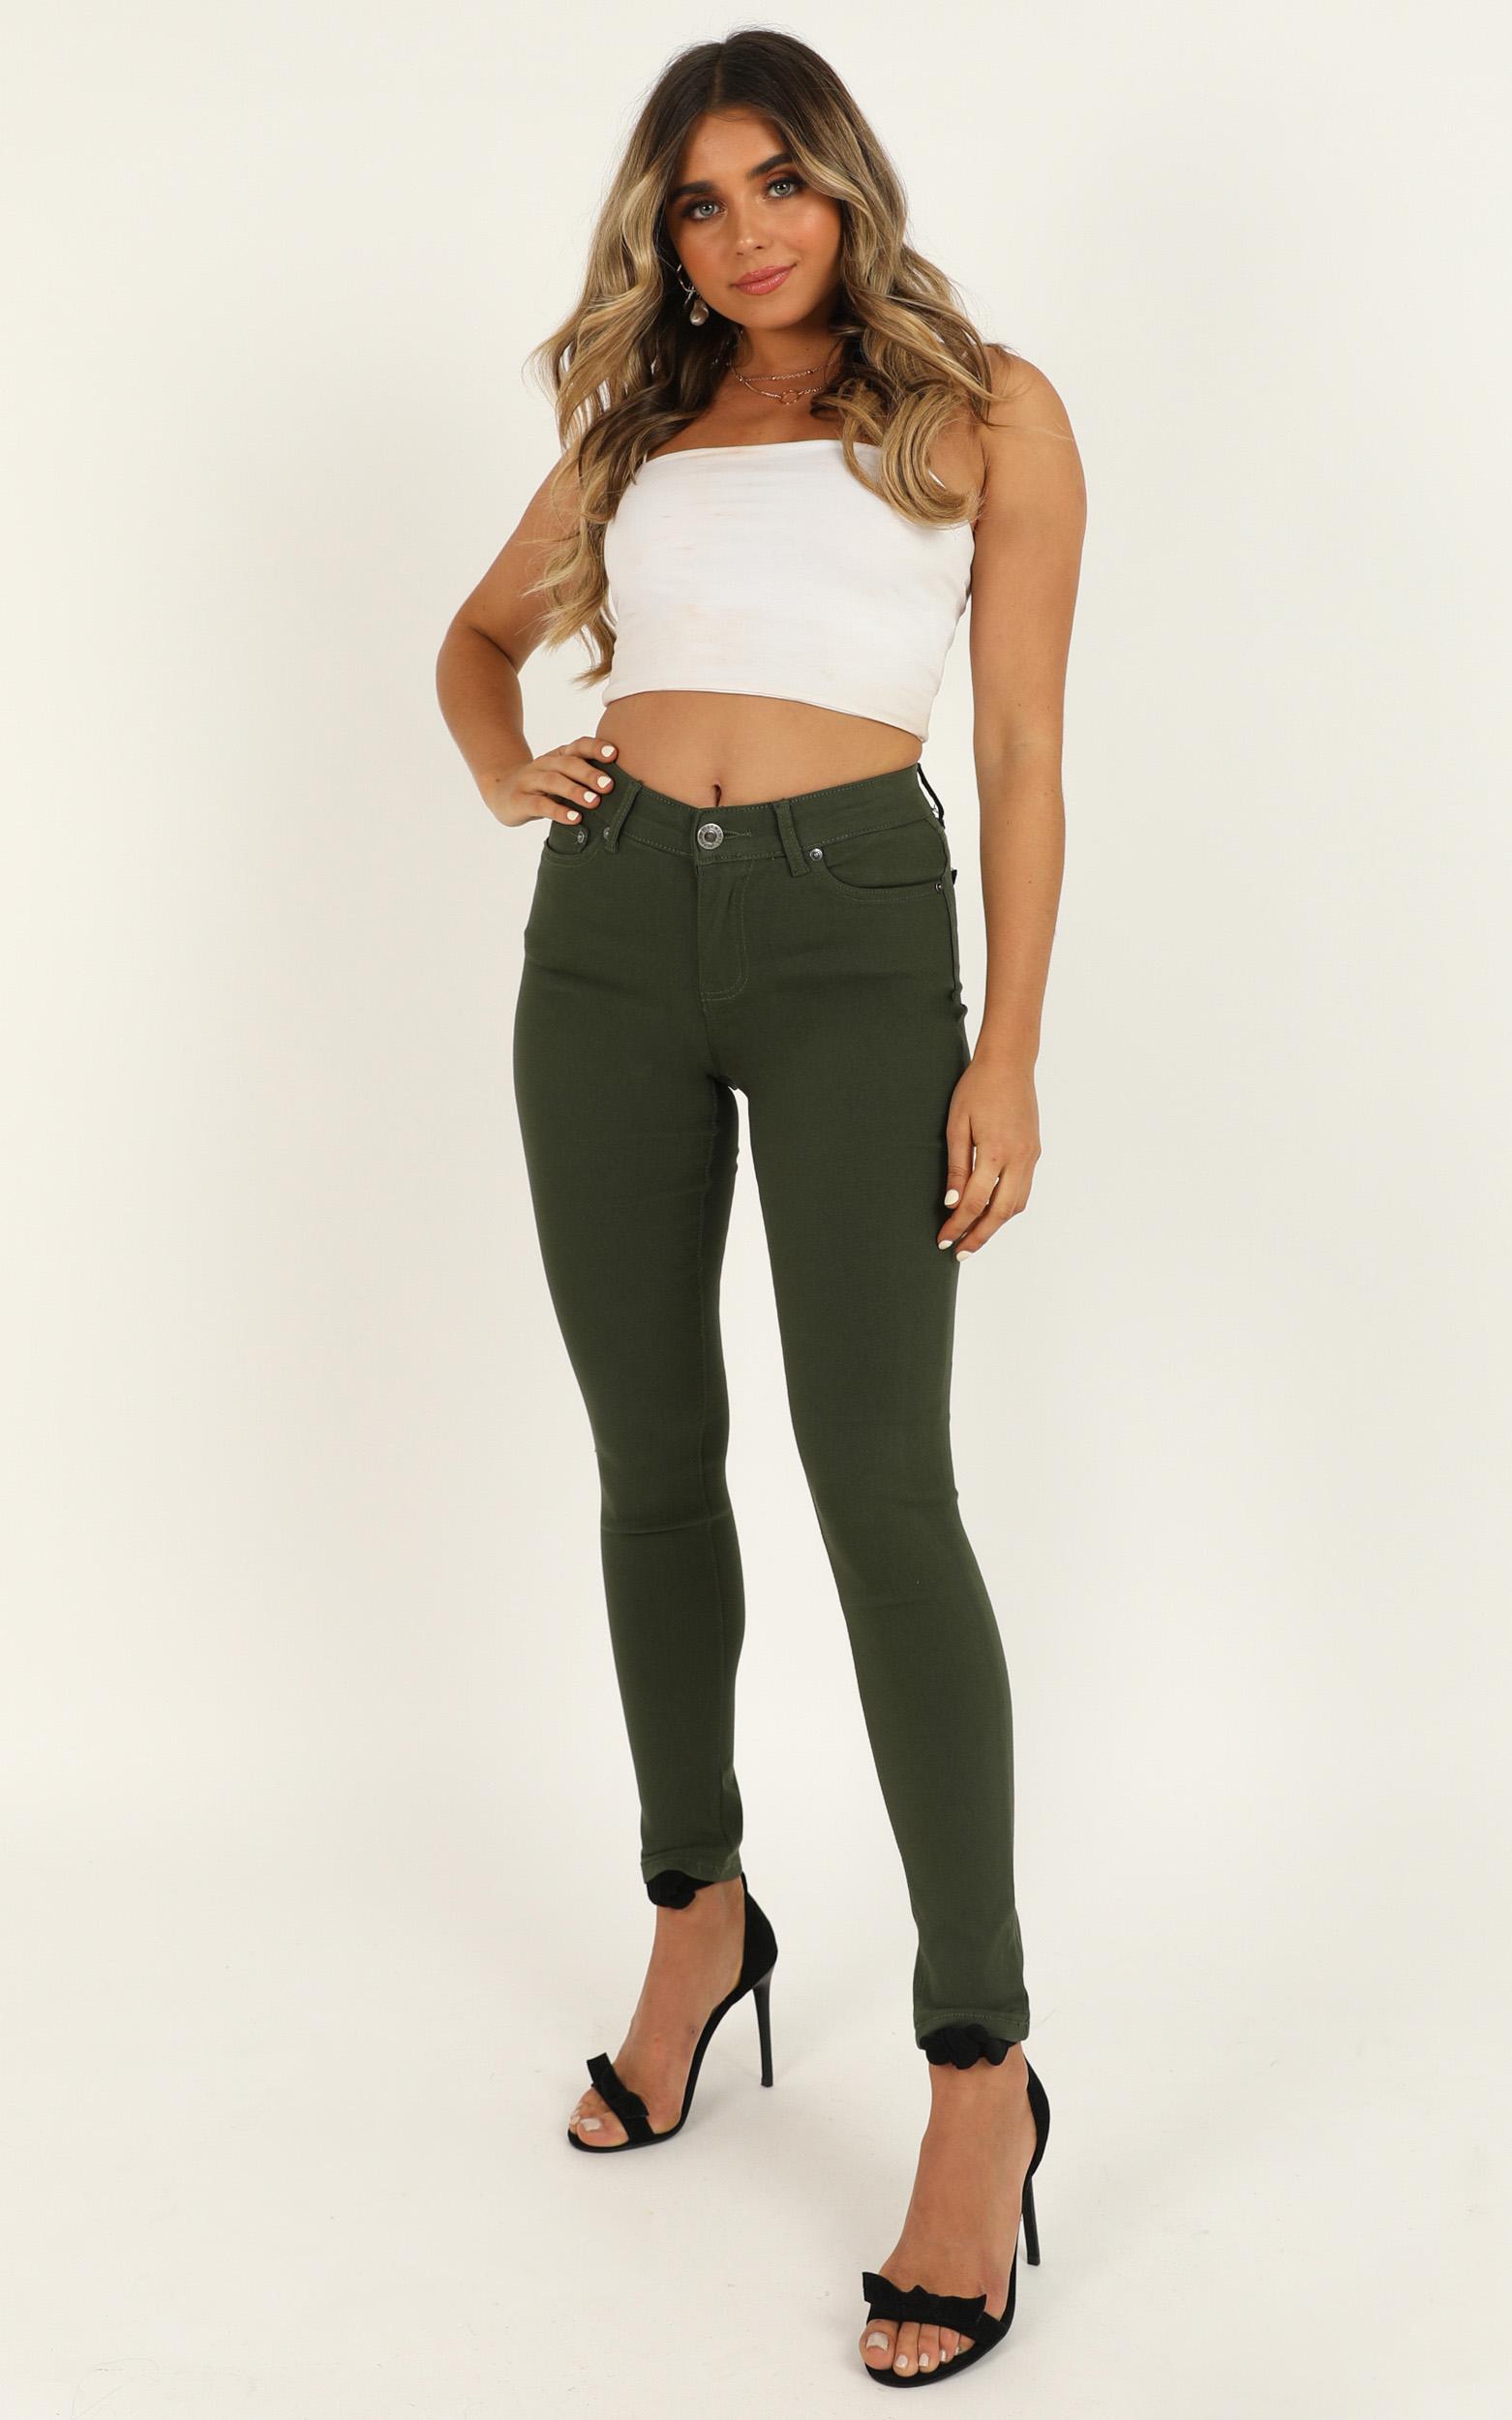 Fill Me In jeggings in khaki - 20 (XXXXL), Khaki, hi-res image number null